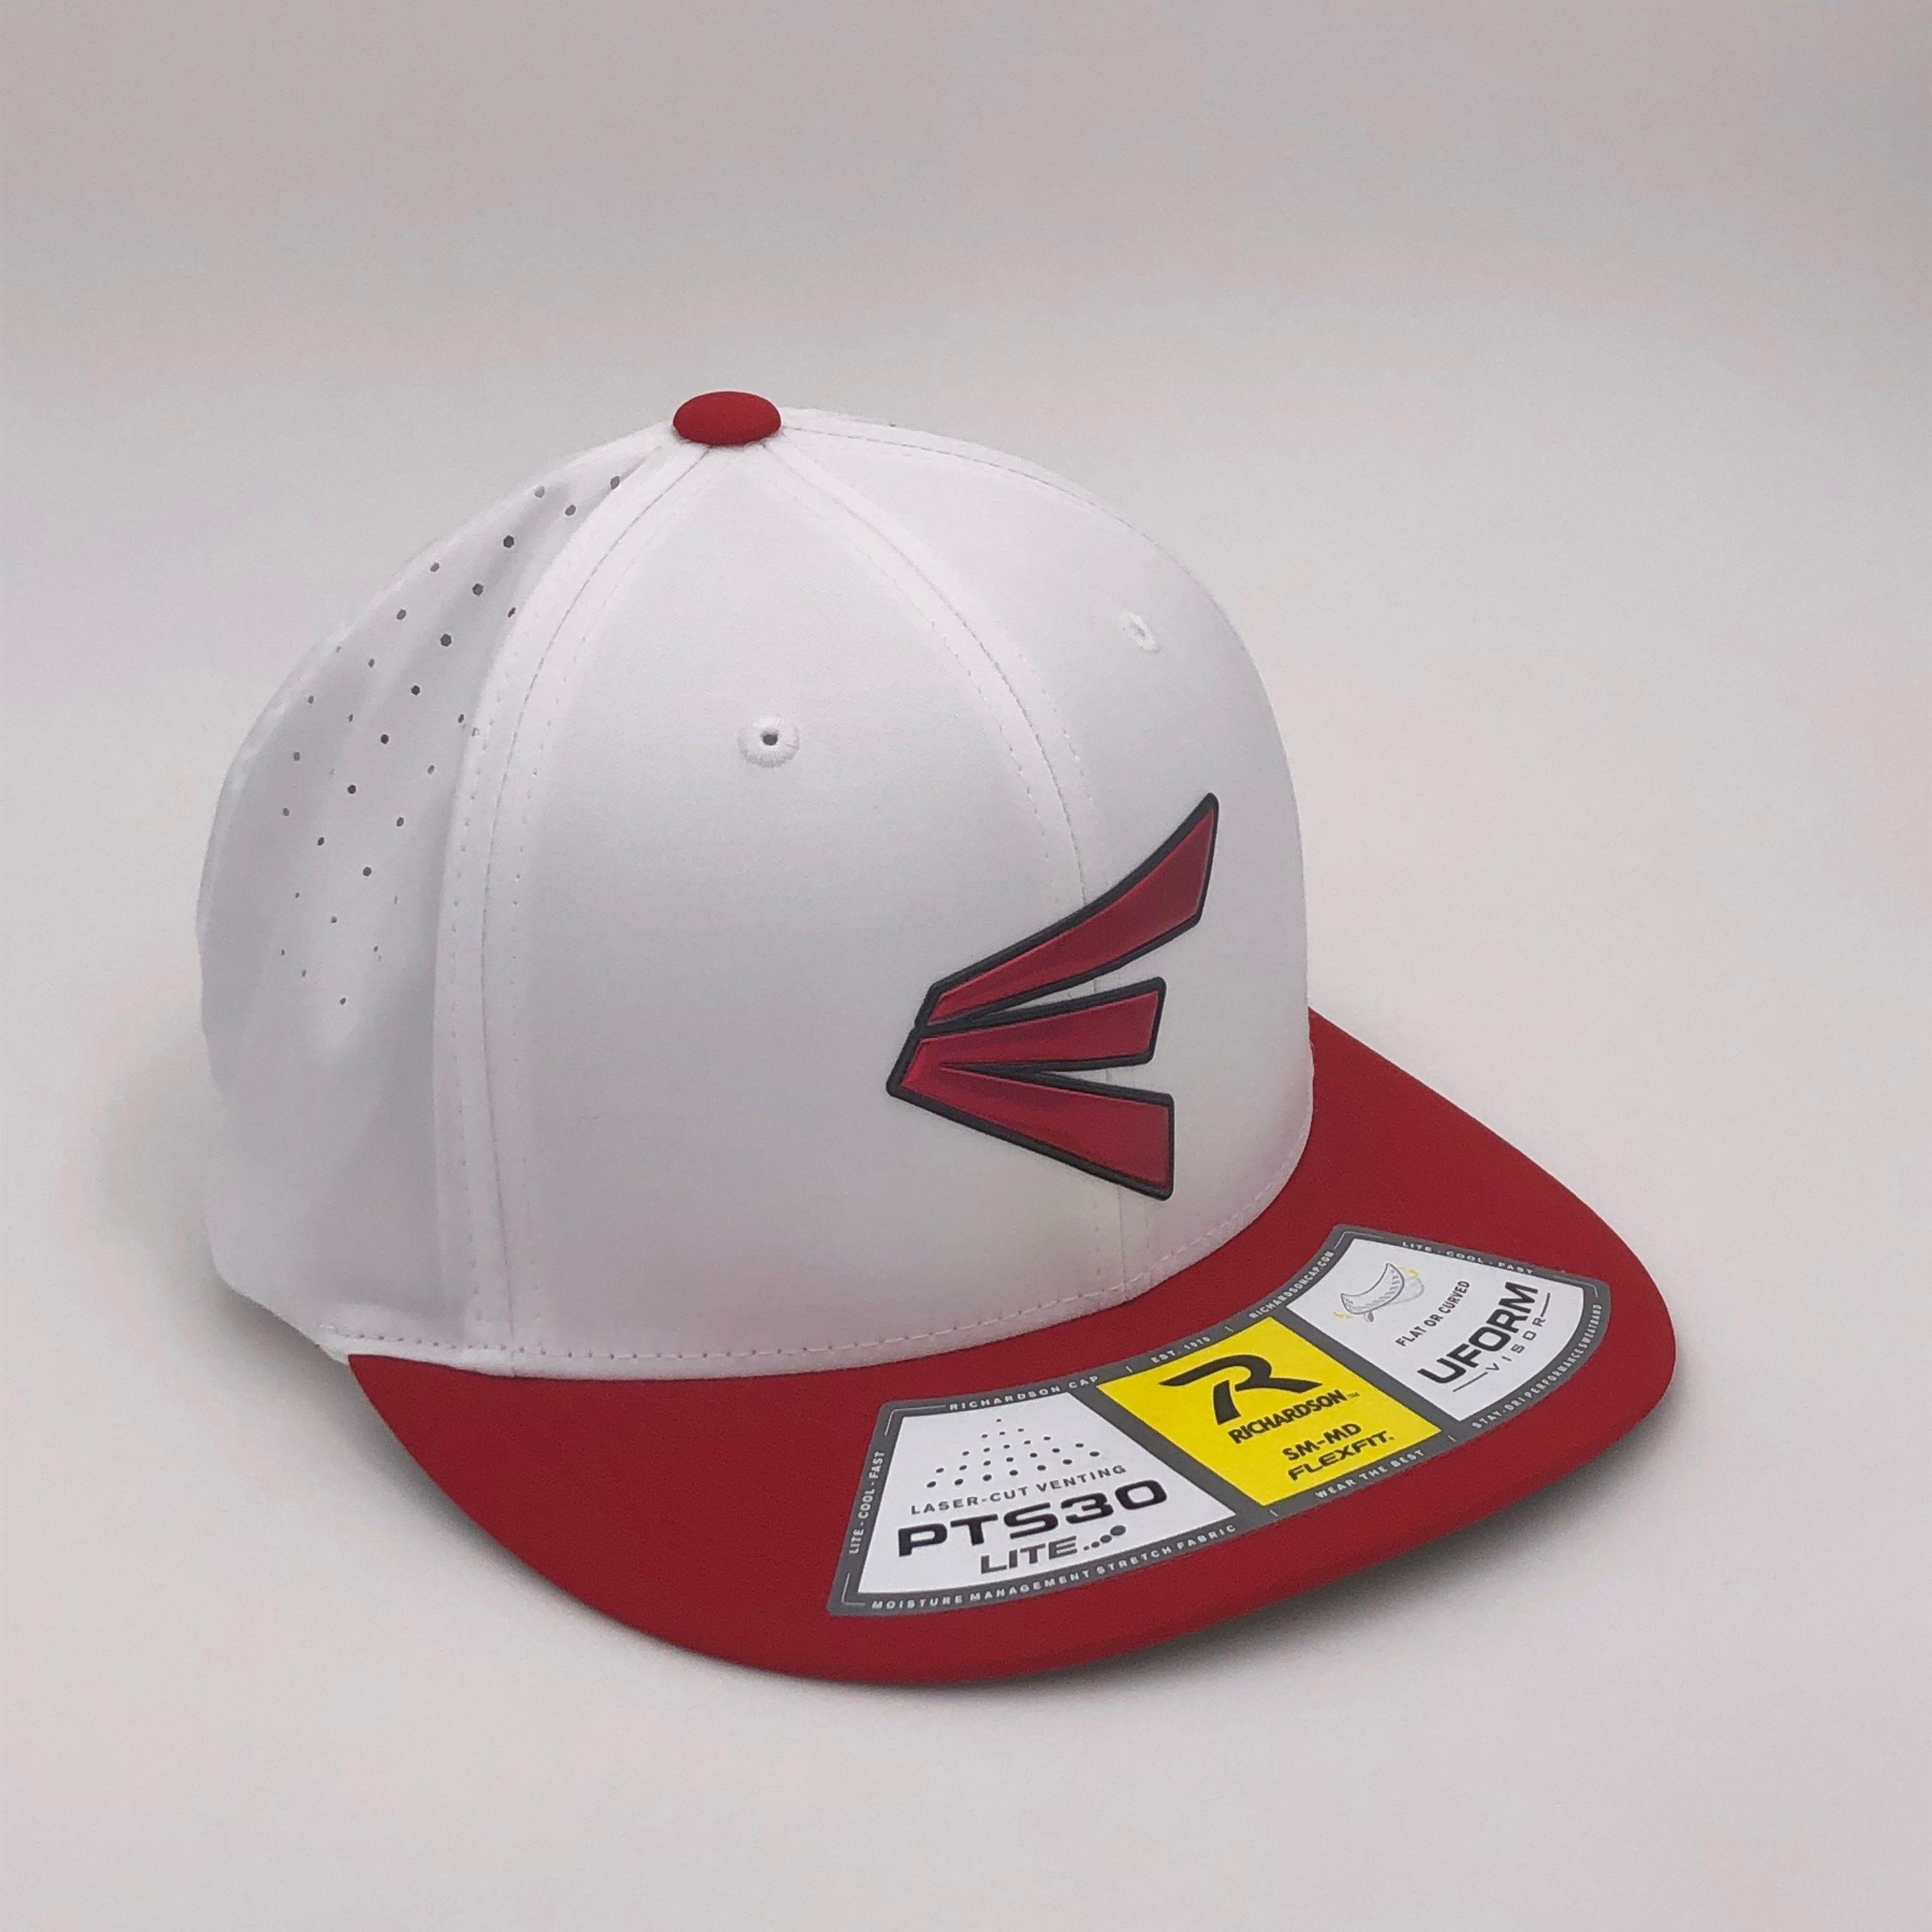 Man in a Red Hat Logo - Easton (PTS30) Limited Edition Poly Press Hat White + Red Hat